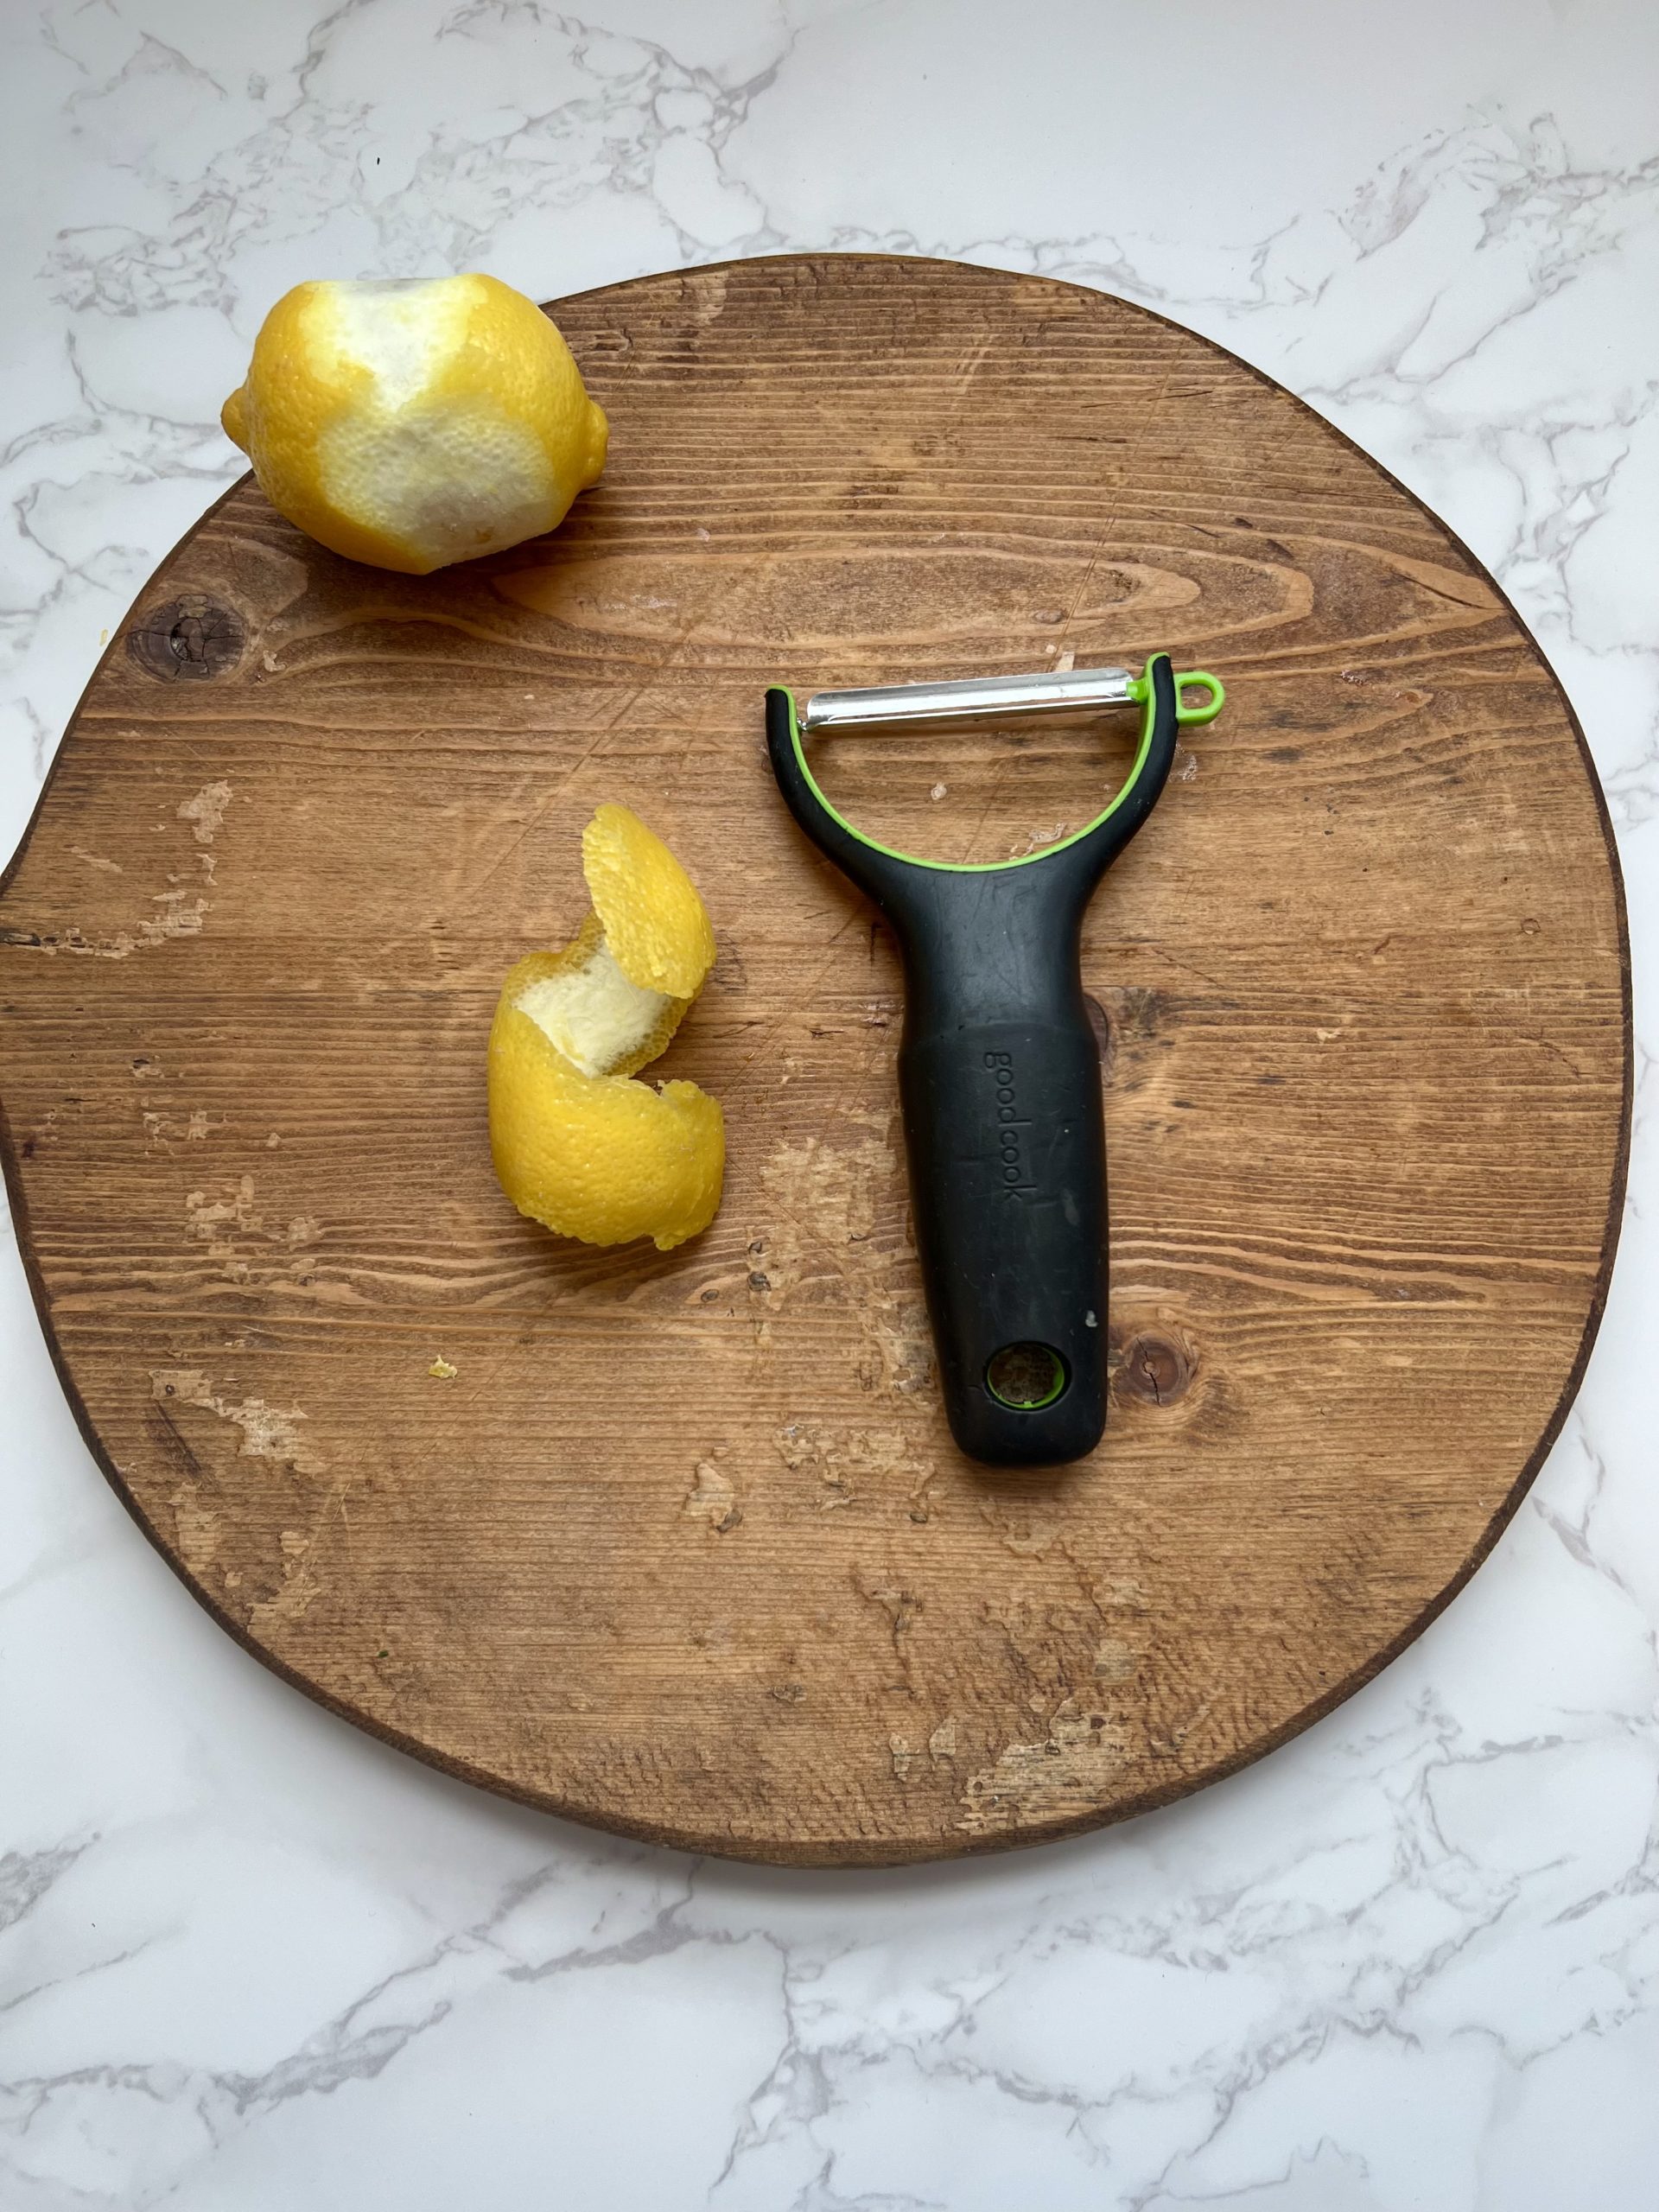 A vegetable peeler, large piece of lemon peel, and partially peeled lemon on a cutting board.